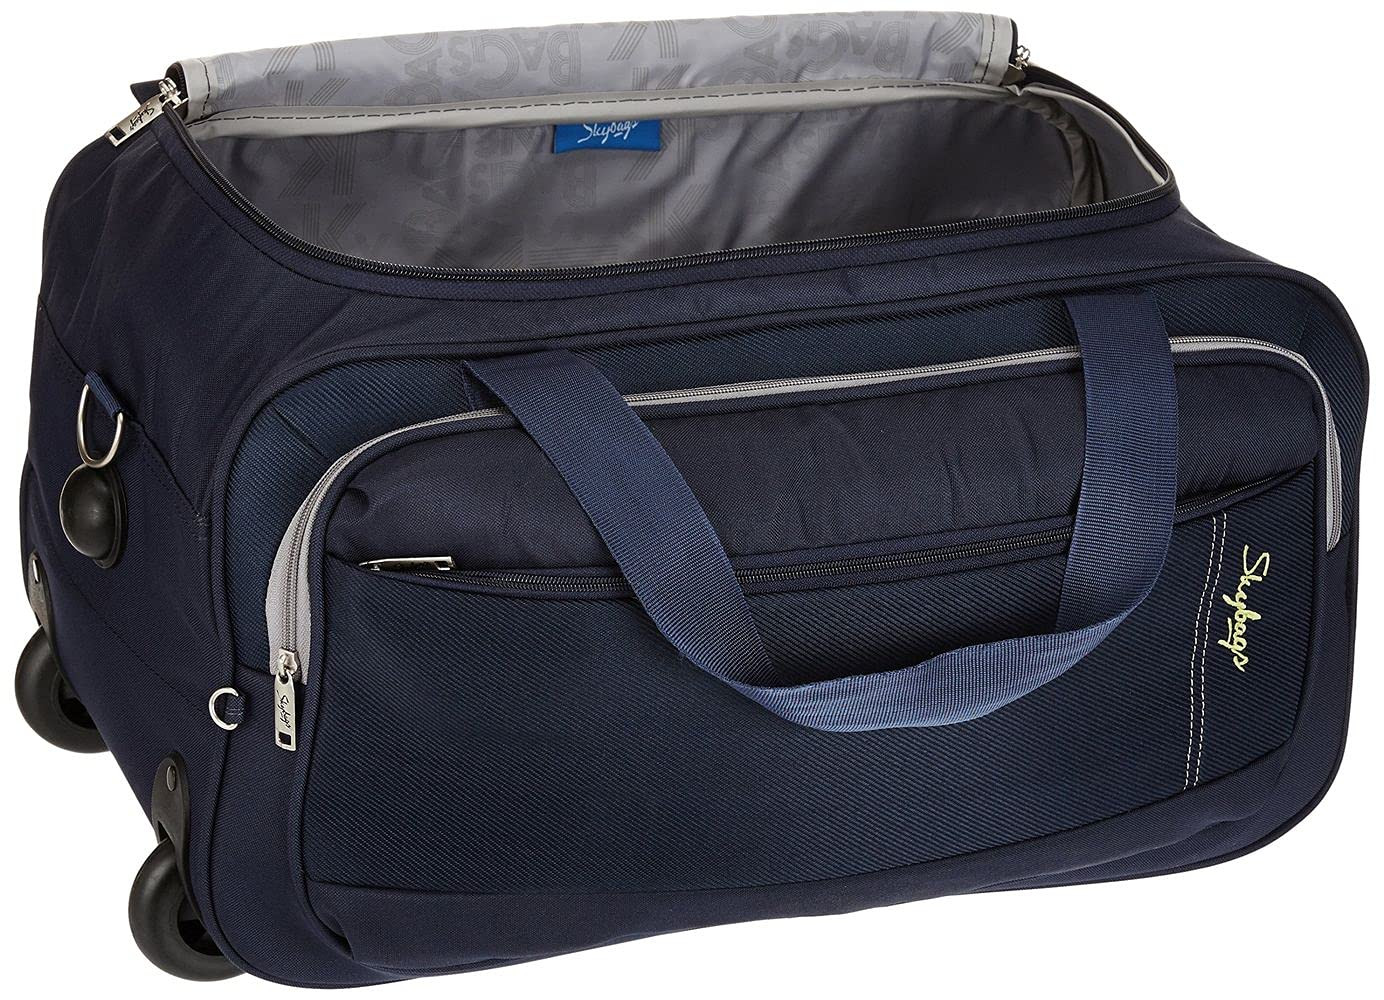 Skybags Cardiff Polyester 52 Cms Wheel Travel Duffle Bag Blue